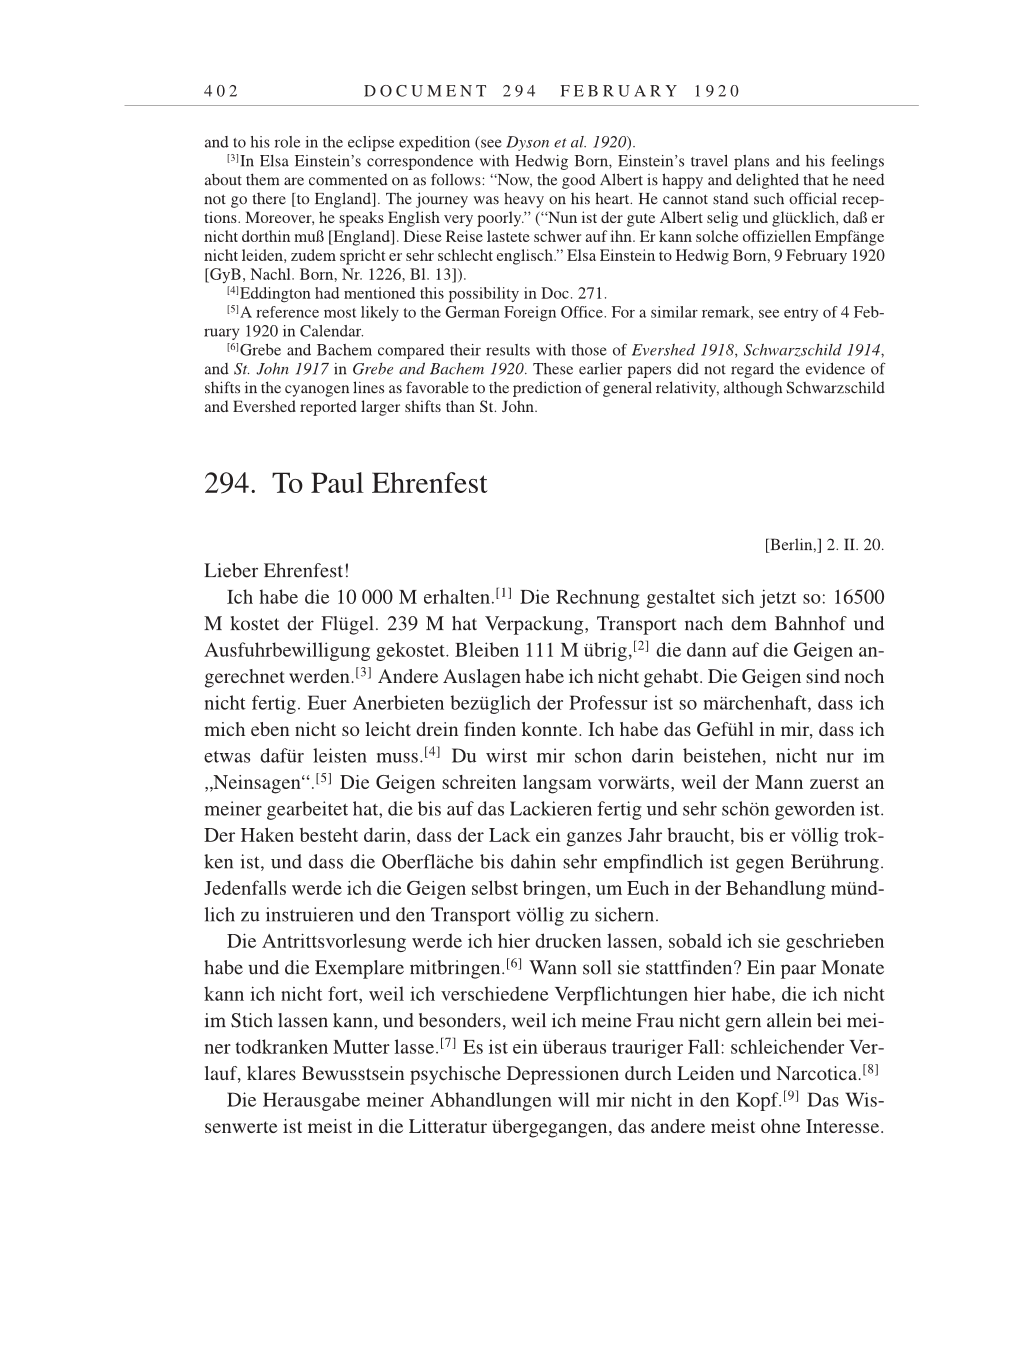 Volume 9: The Berlin Years: Correspondence January 1919-April 1920 page 402